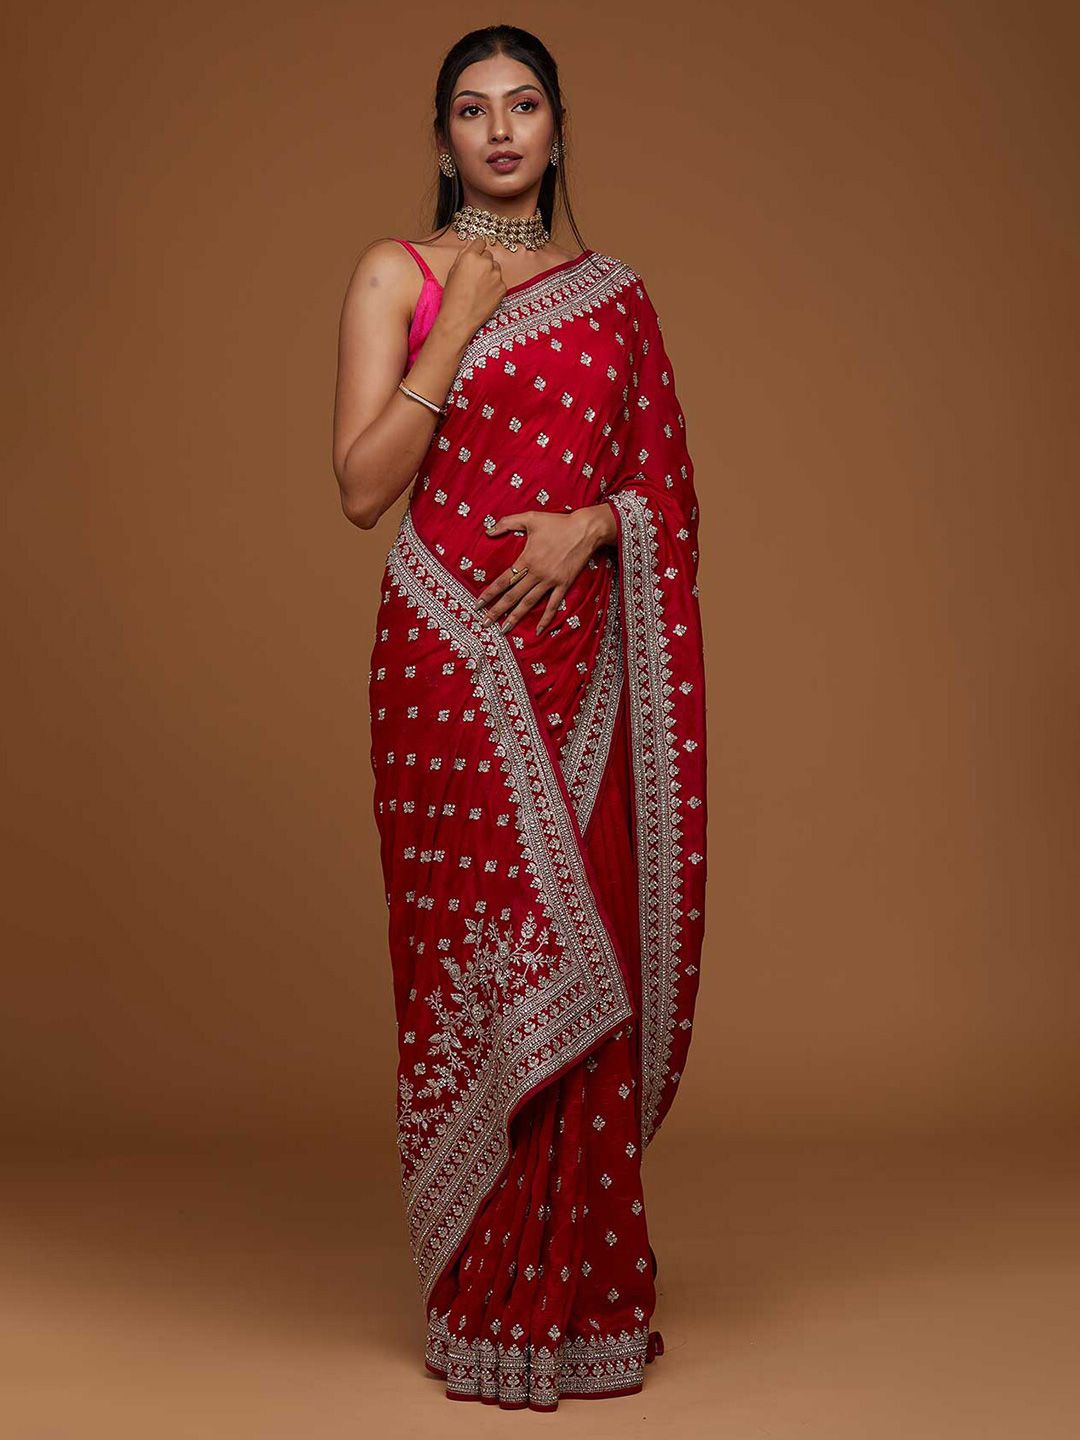 Koskii Red & Silver-Toned Ethnic Motifs Beads and Stones Art Silk Saree Price in India